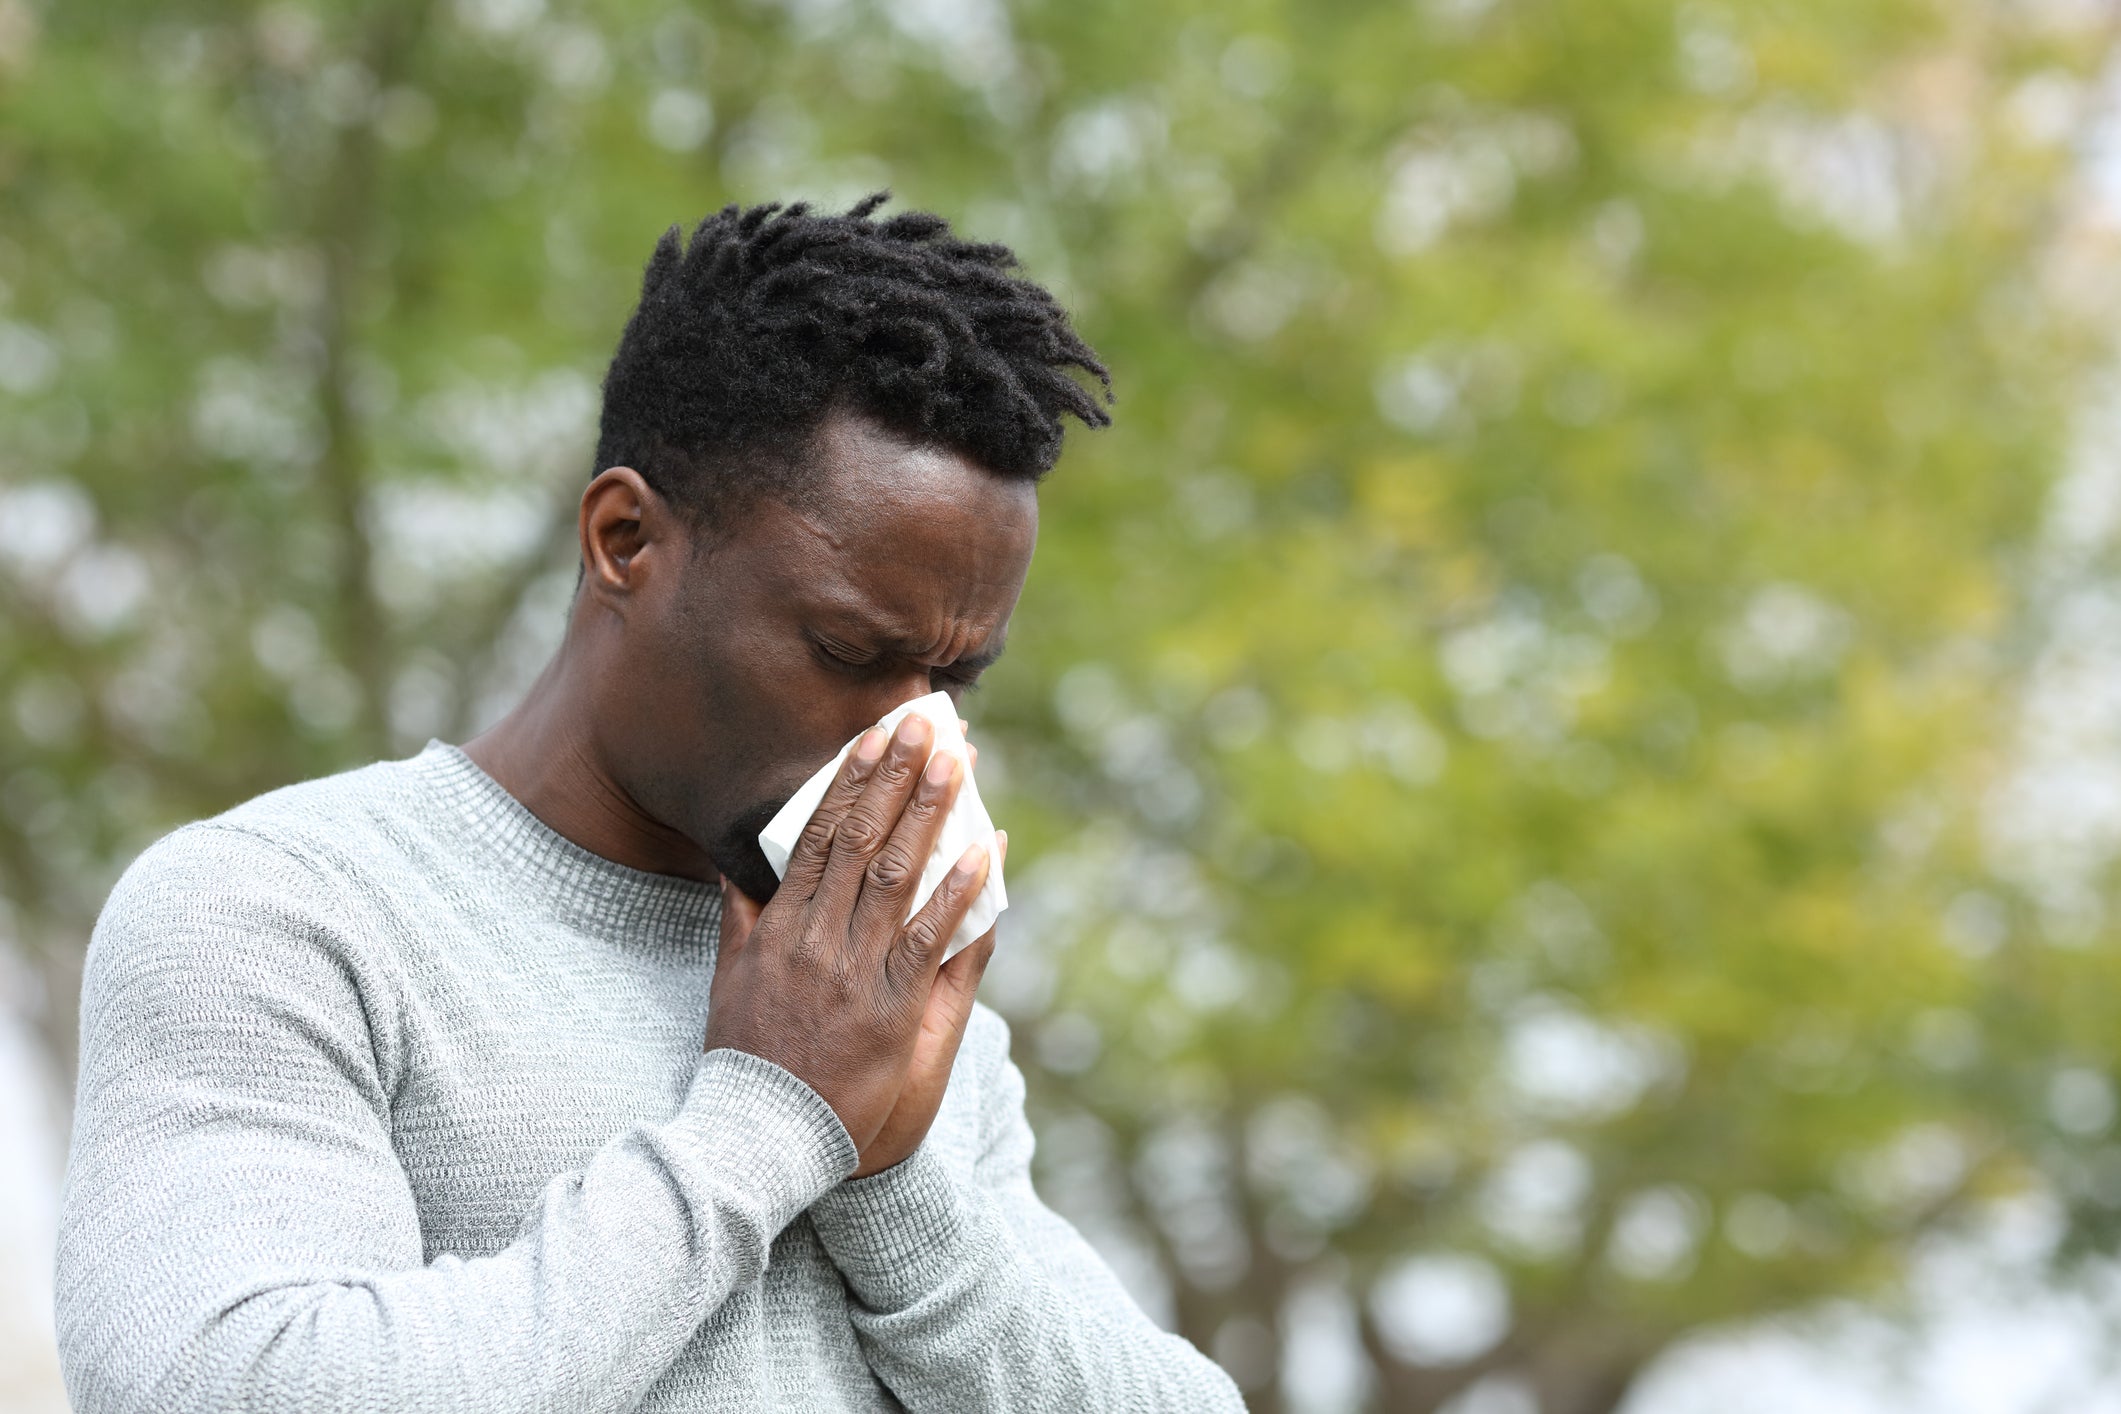 Sneezing is a reflex action that blasts air at up to 103mph to clear the air passages